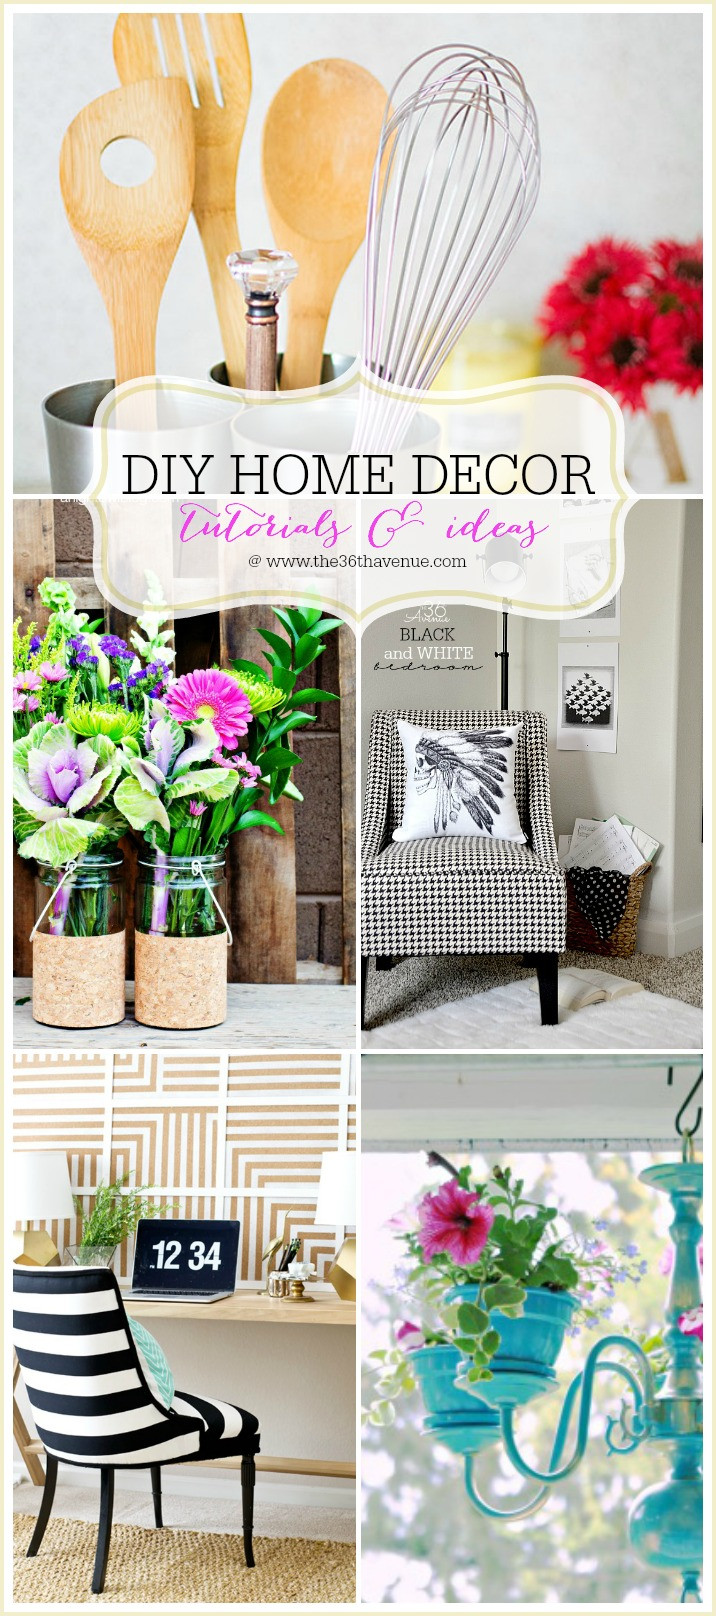 Easy DIY Home Decorating
 The 36th AVENUE Home Decor DIY Projects